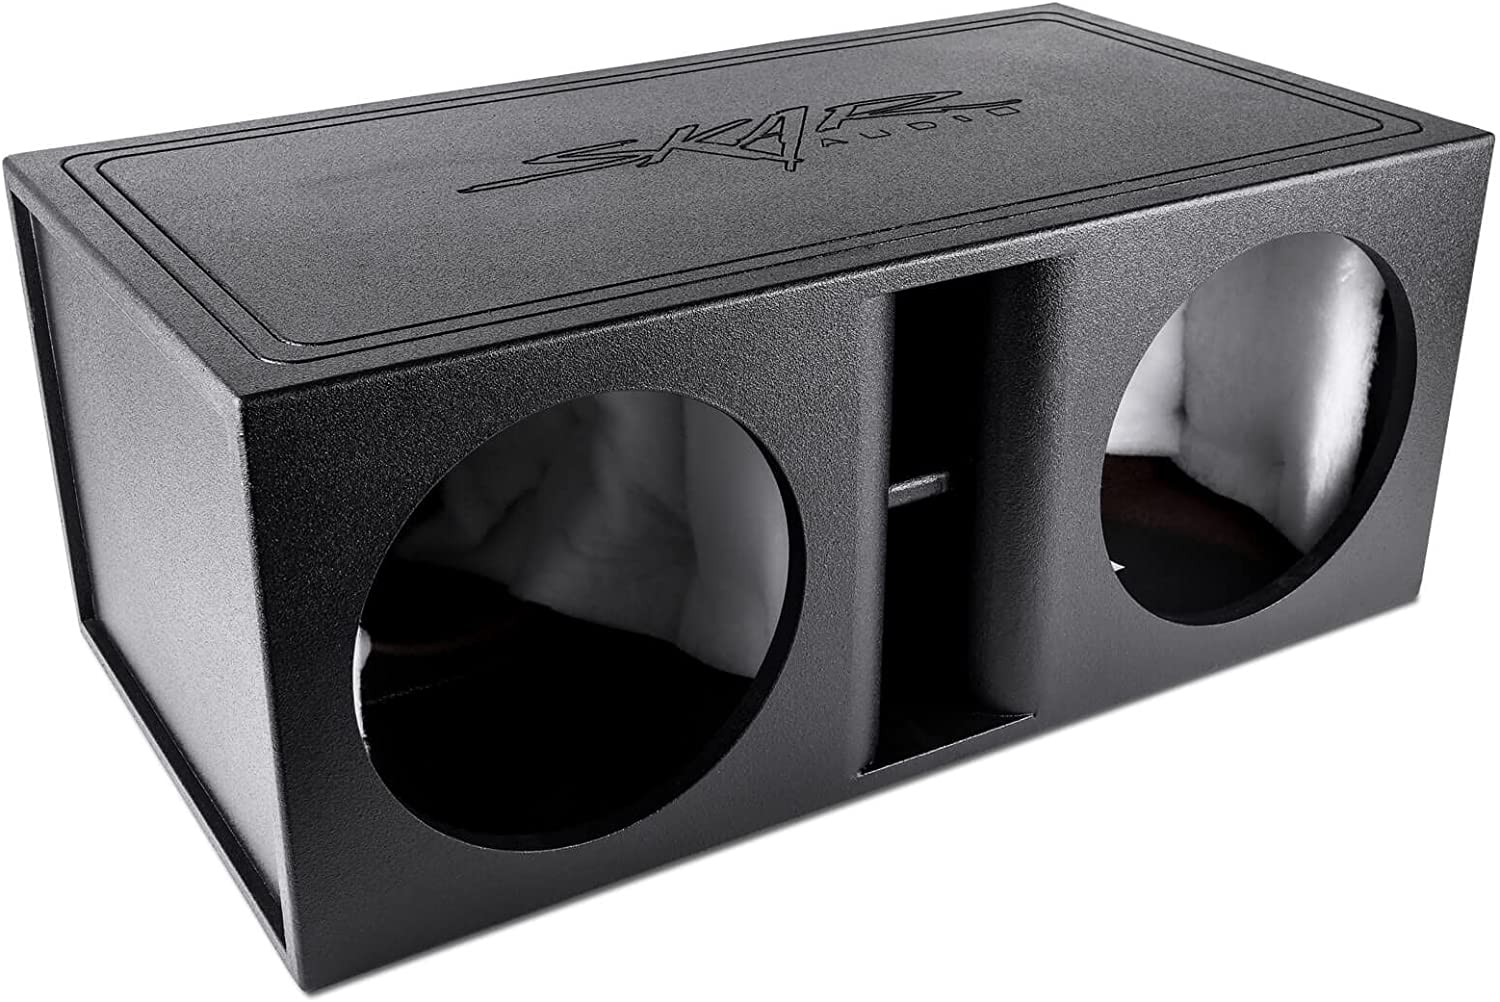 The loudest Subwoofer Box Ever 